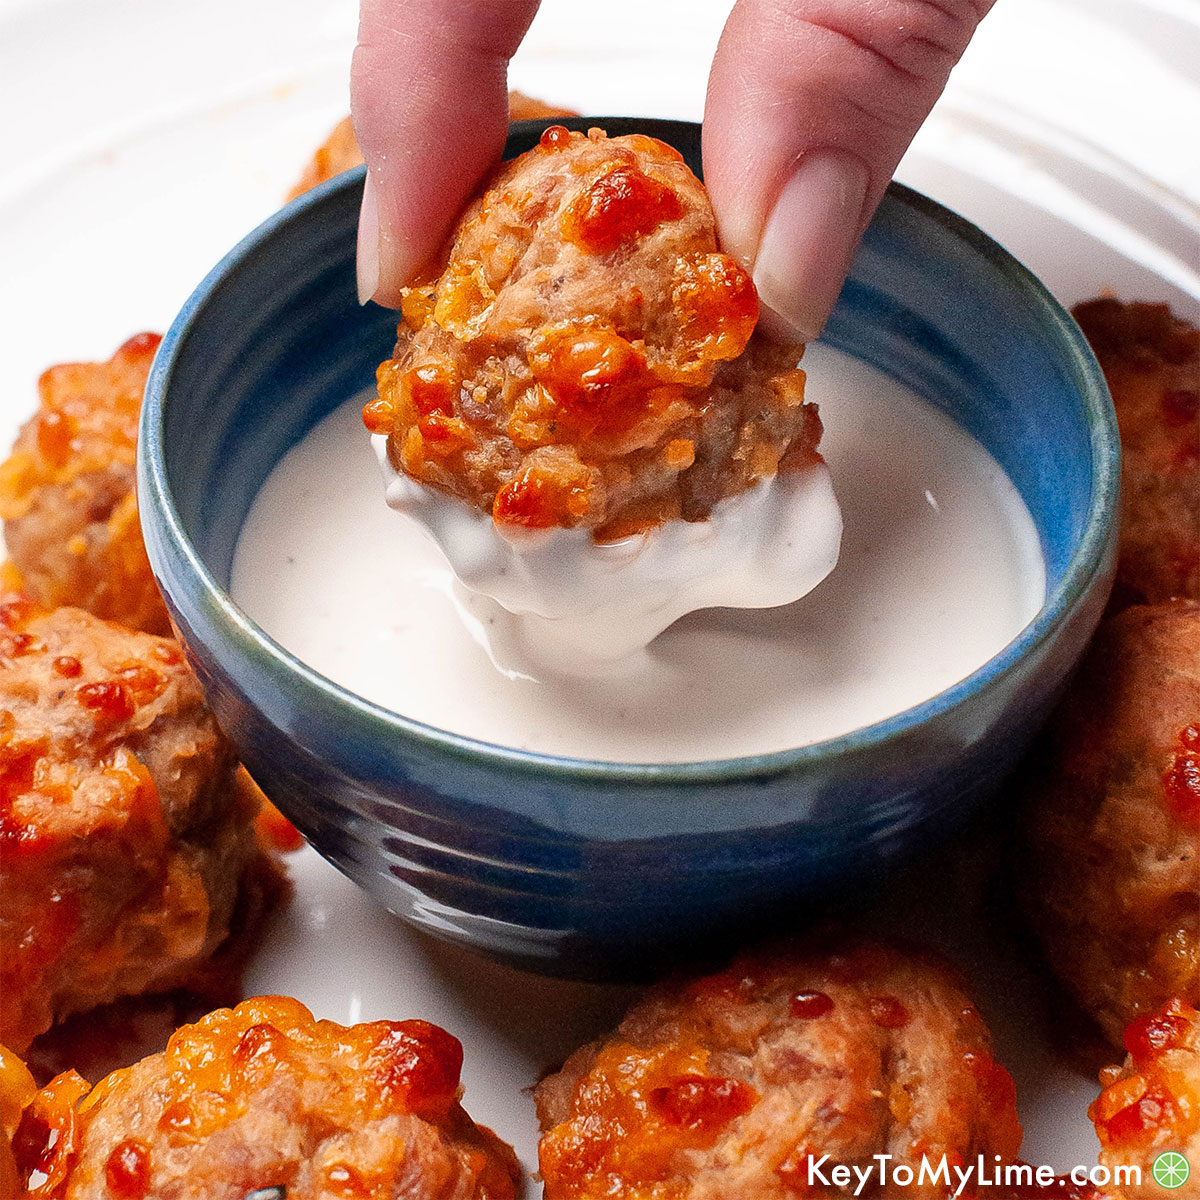 The best sausage ball recipe.